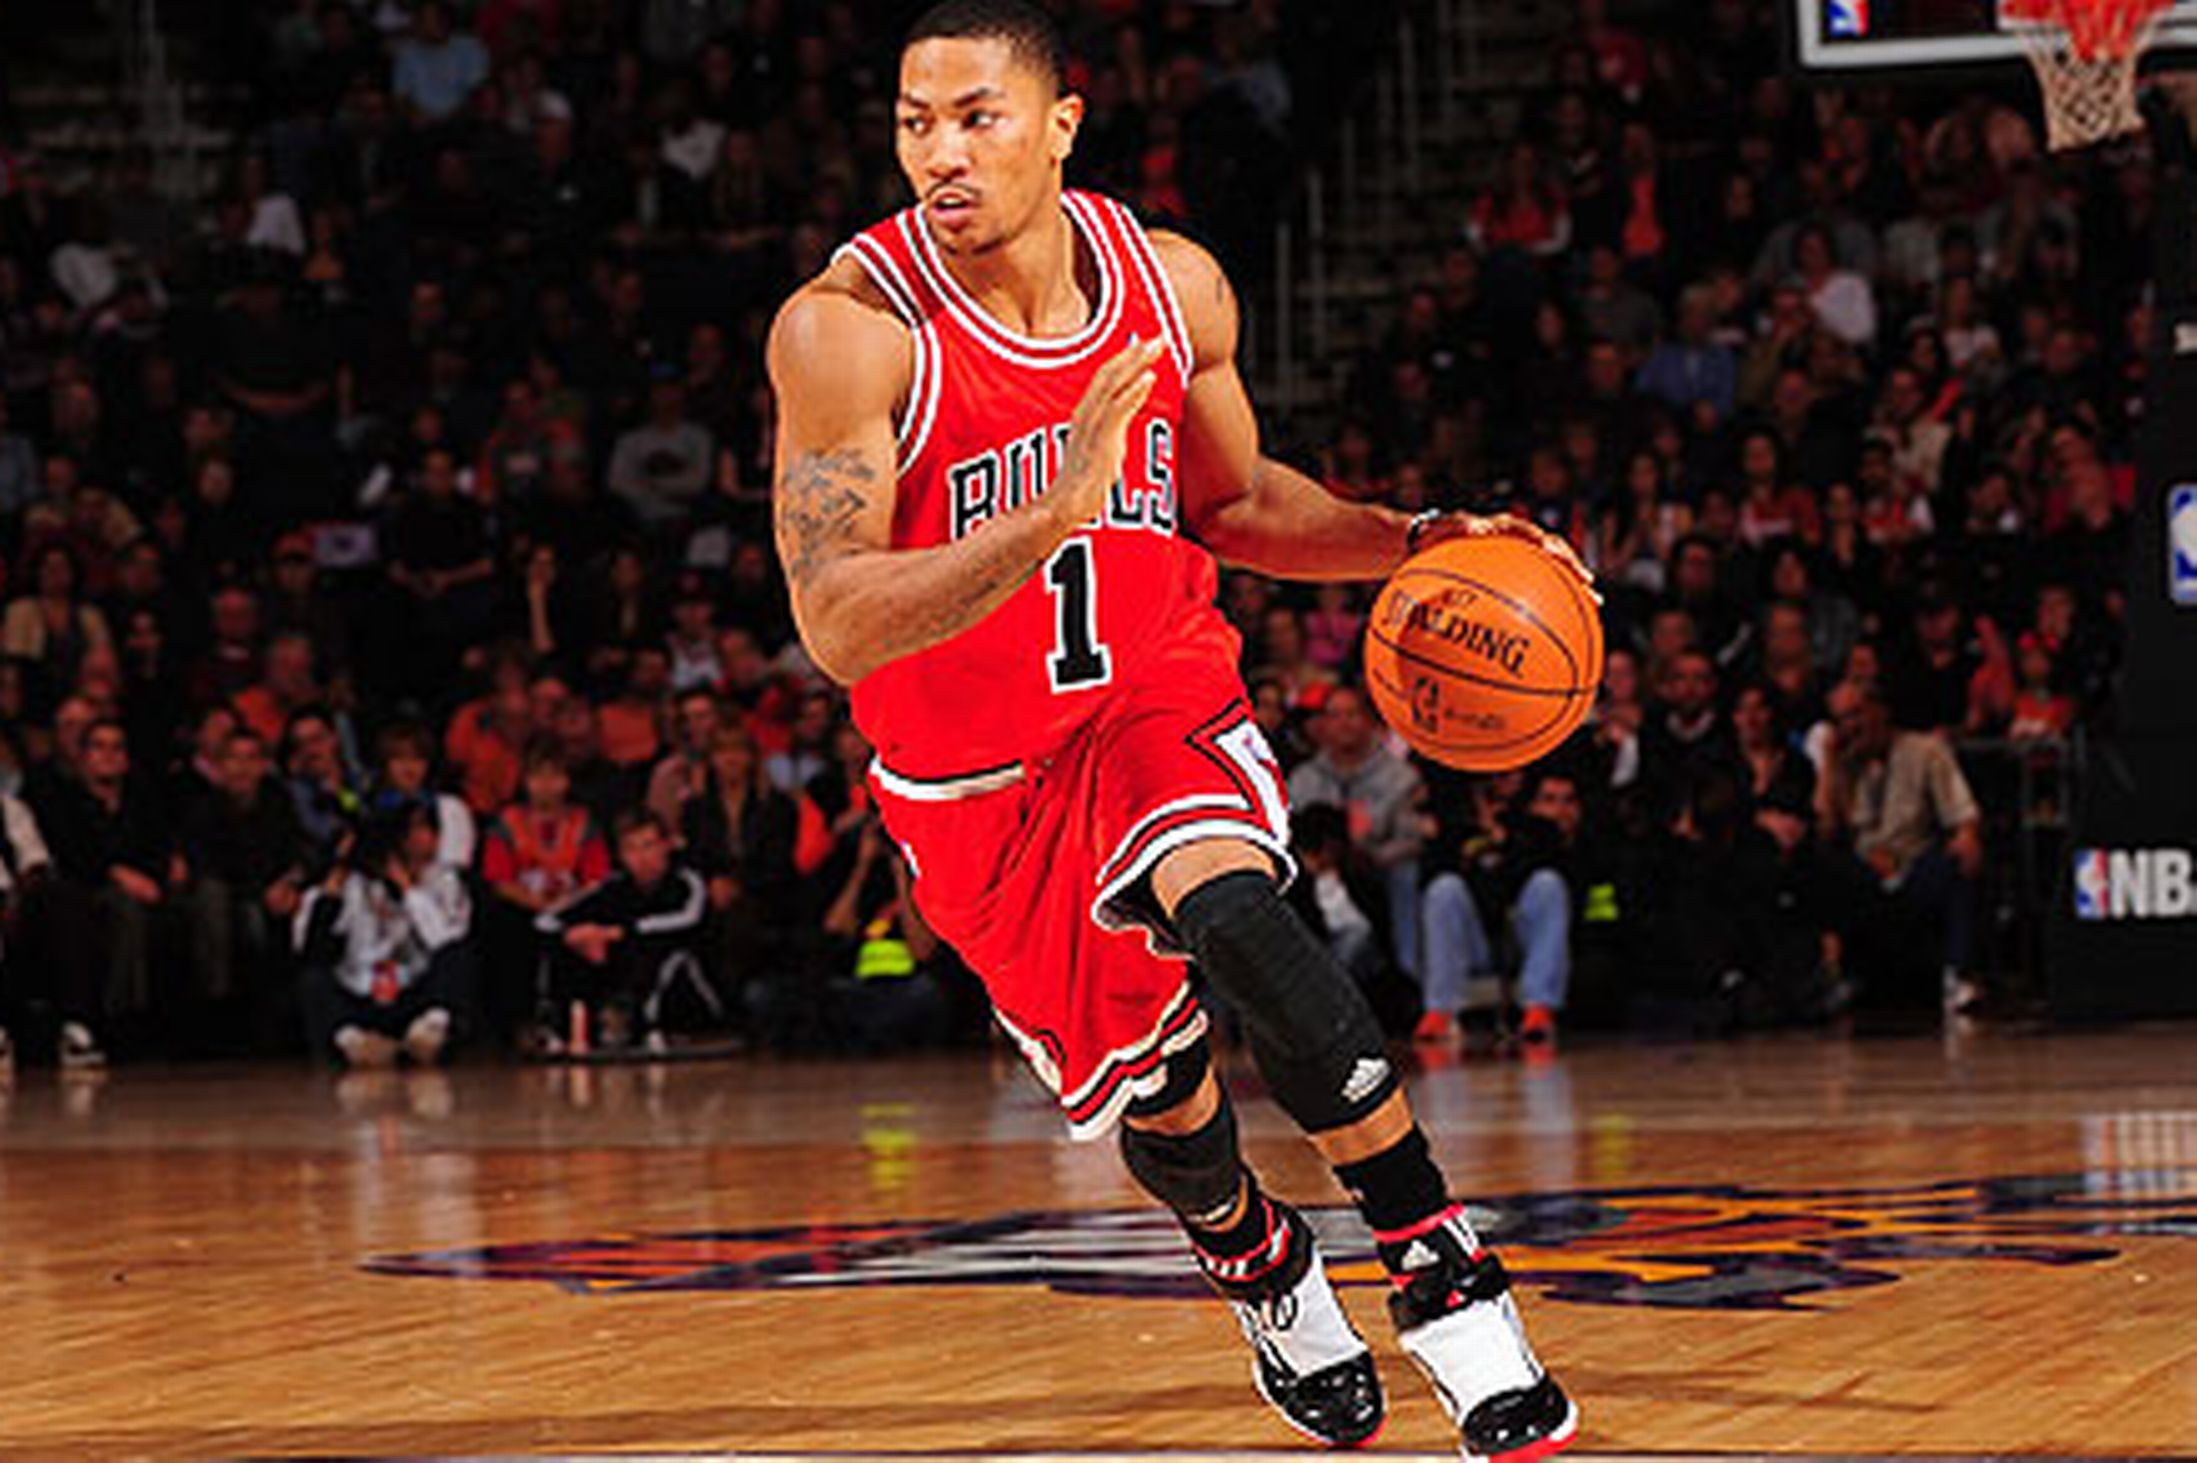 derrick-rose-pic-getty-images-.